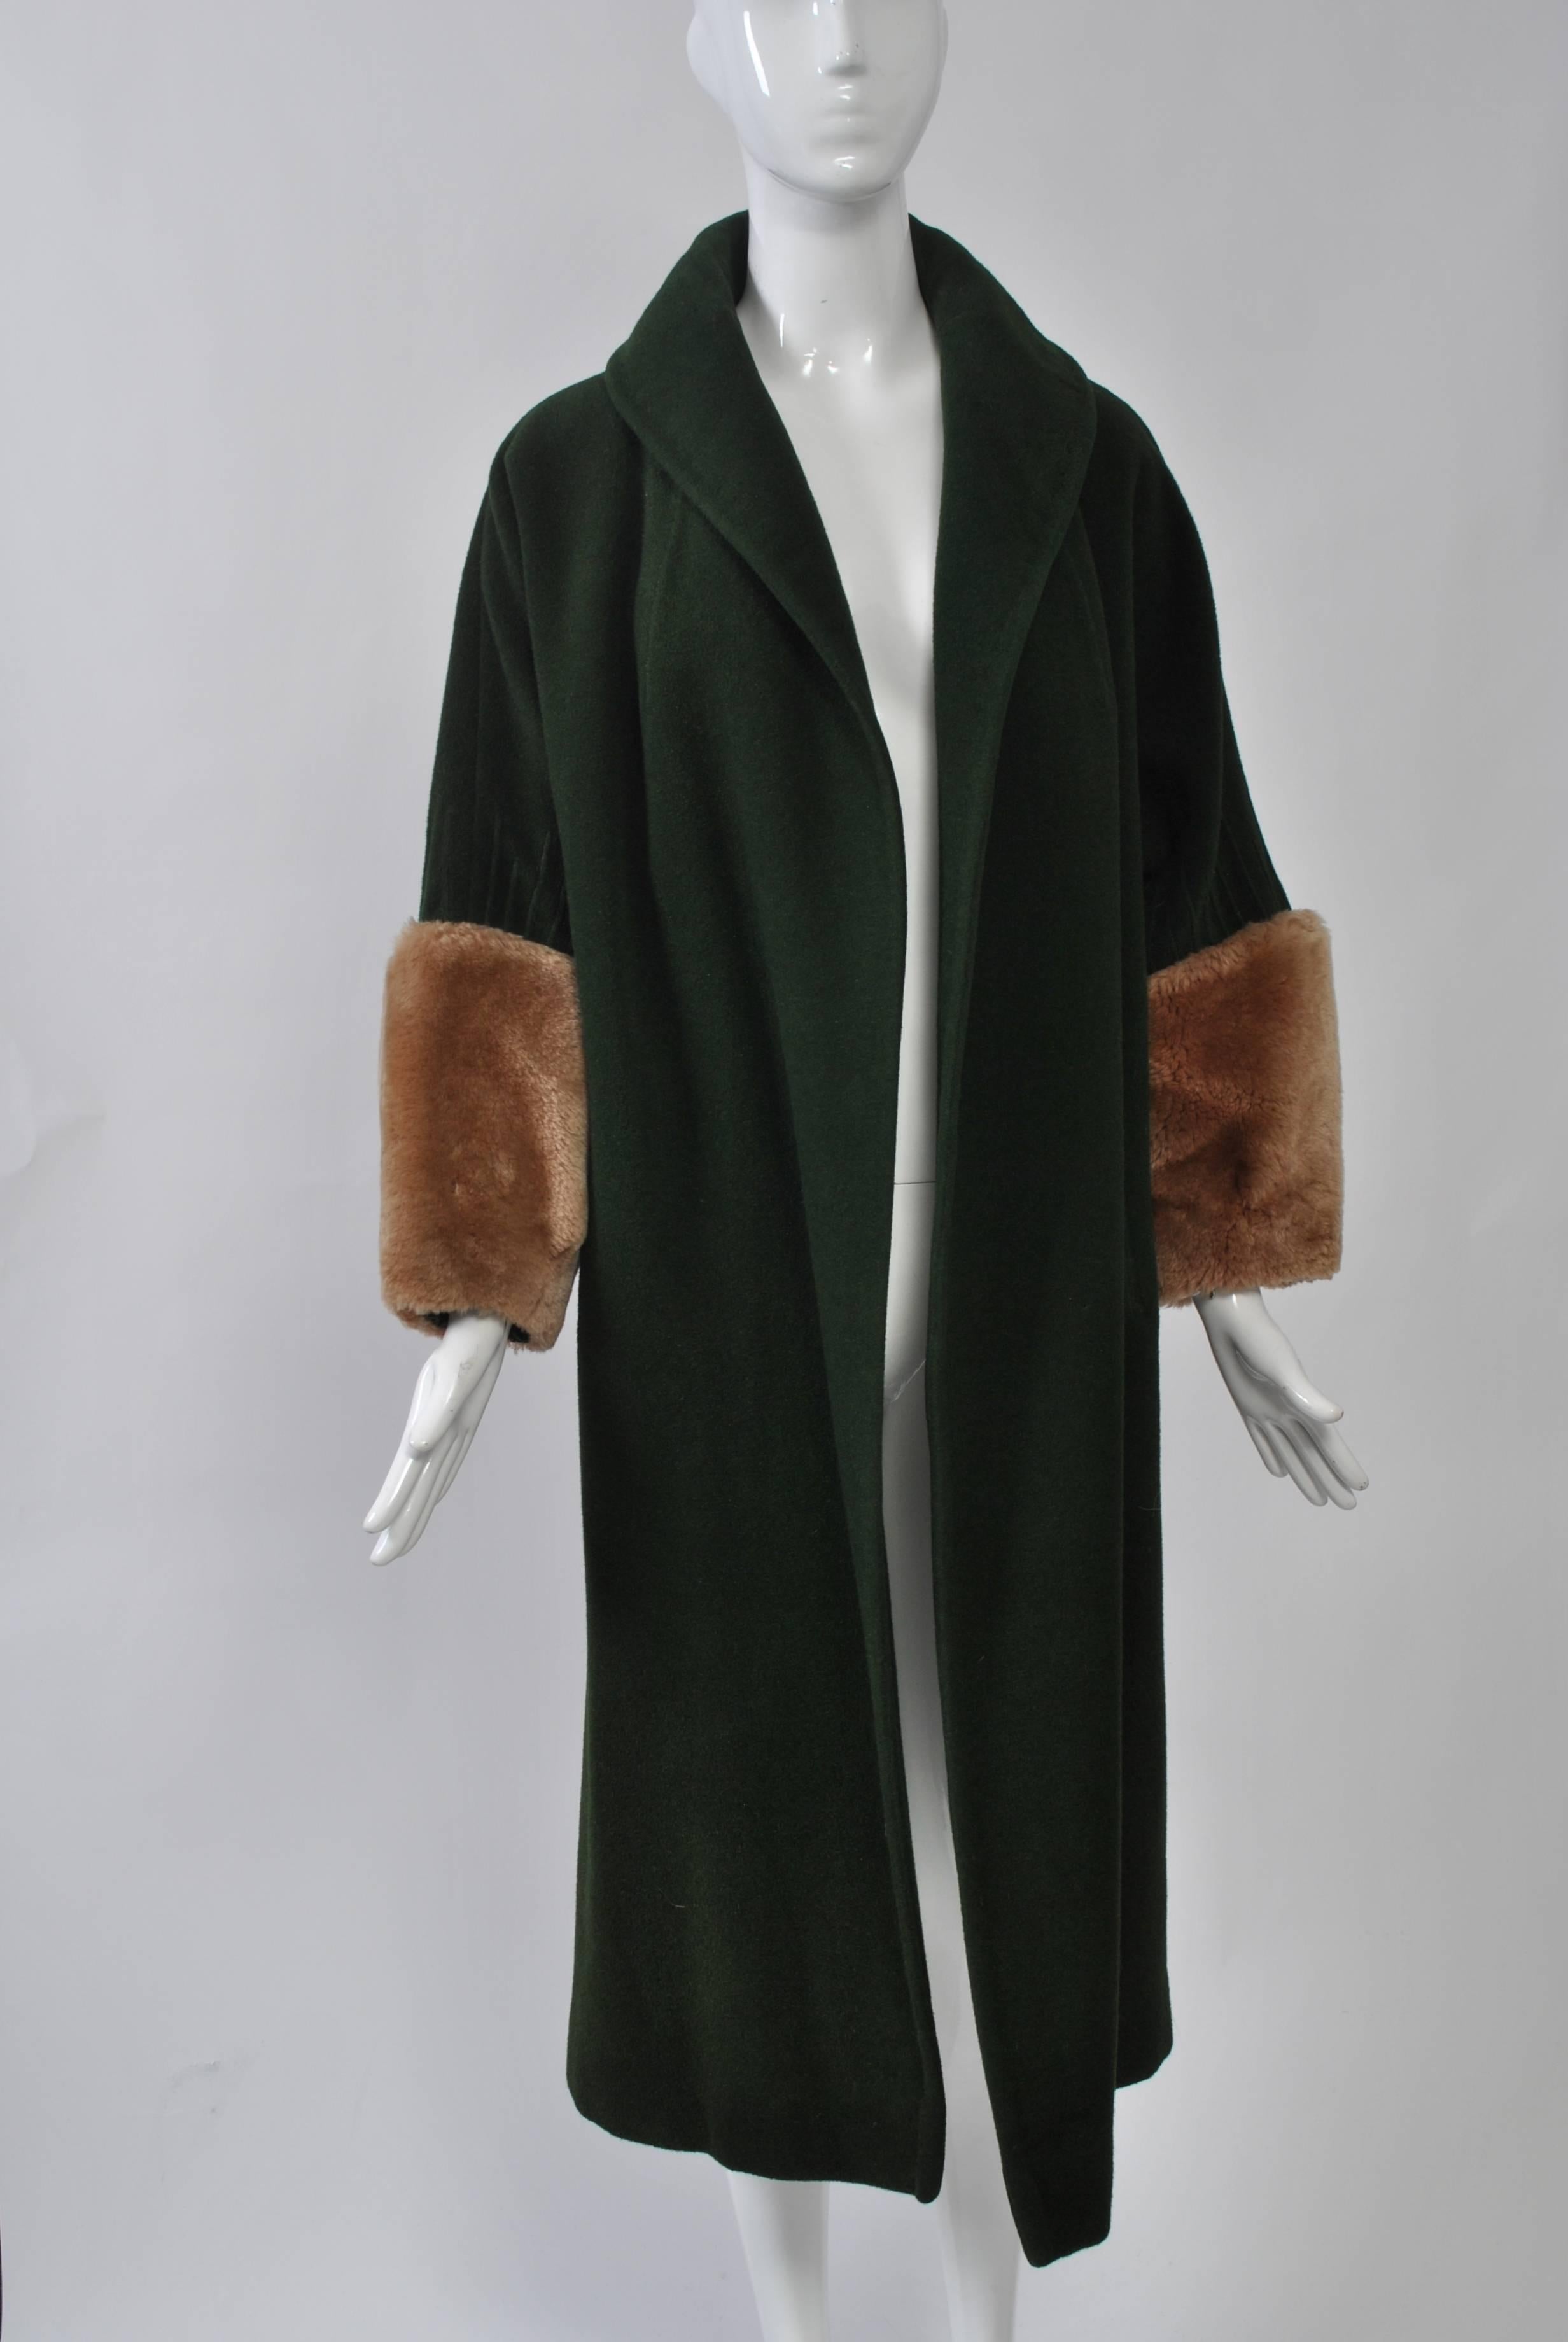 Lilli Ann clutch coat in forest green plush wool with deep fur cuffs, probably mouton. Straight, below-the-knee cut with shawl collar and vertical stitching on the sleeves above the cuffs. Size S-M.